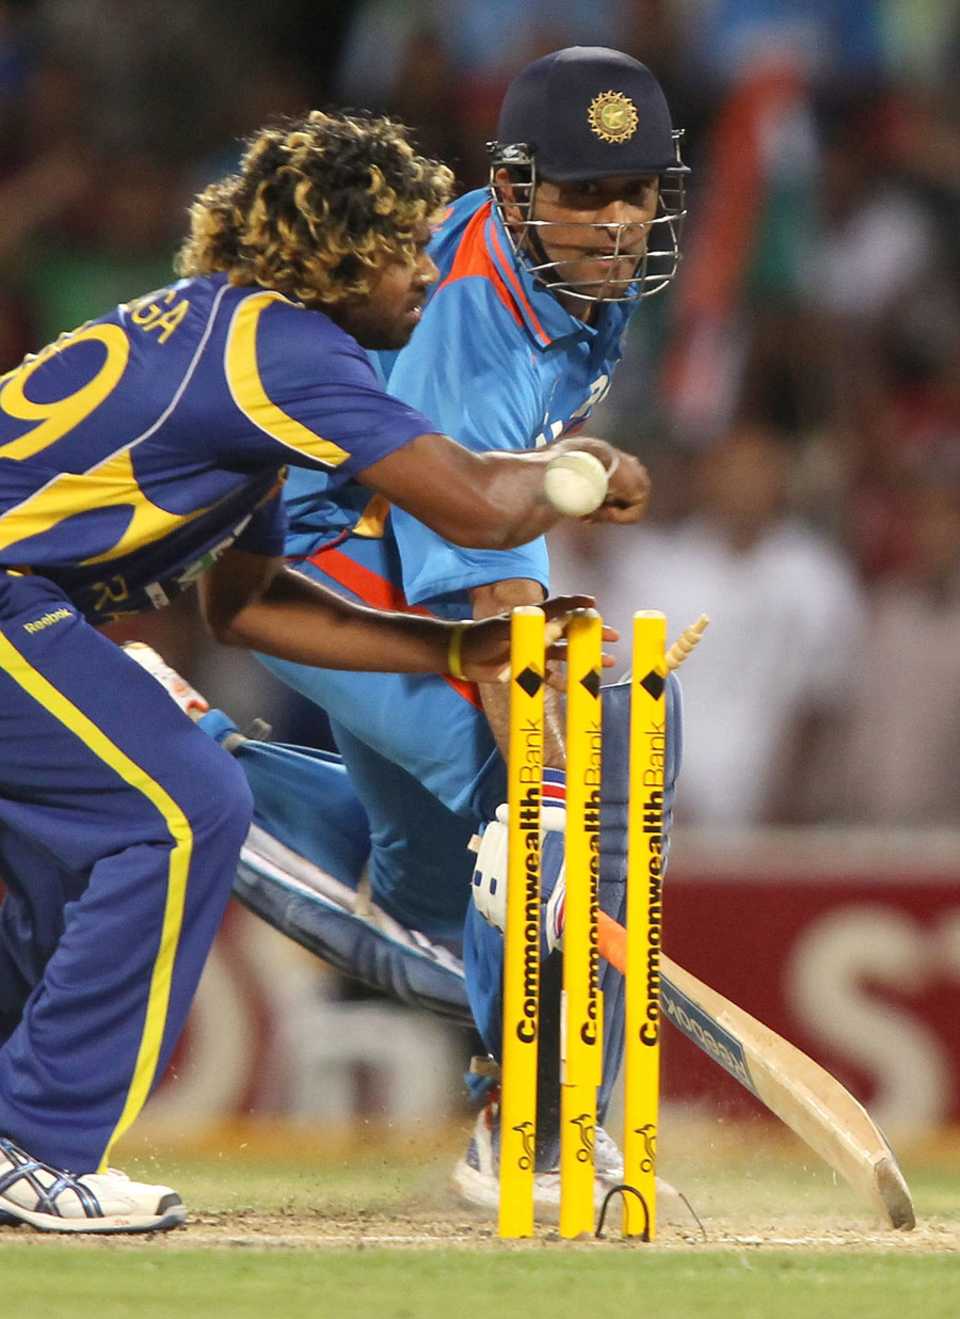 Lasith Malinga misses a chance to run out MS Dhoni in the final over